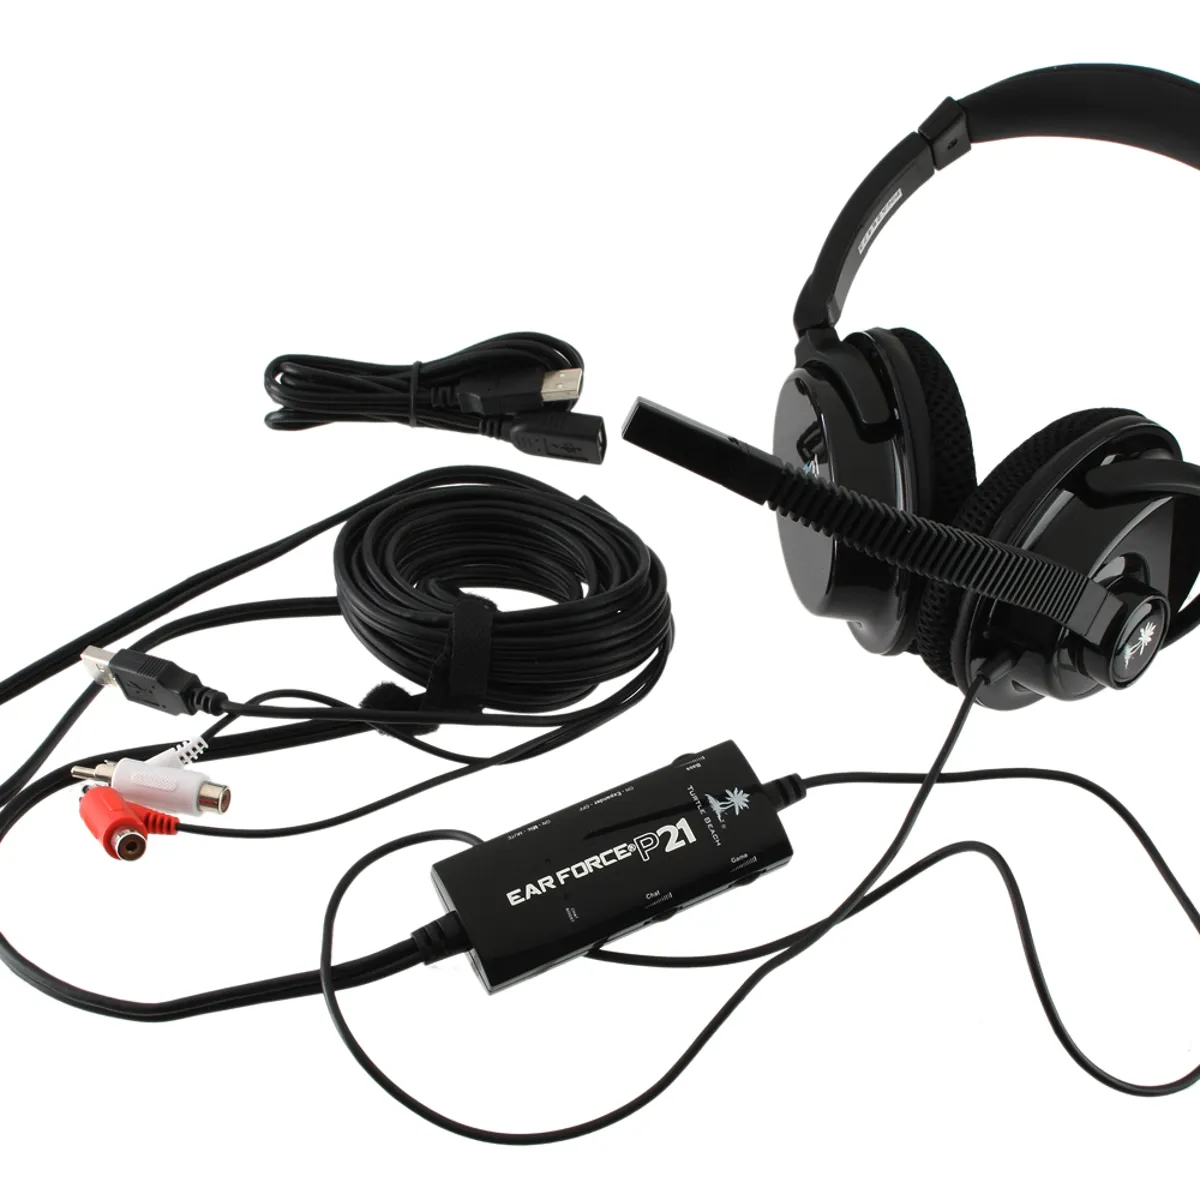 Ear Force DPX21